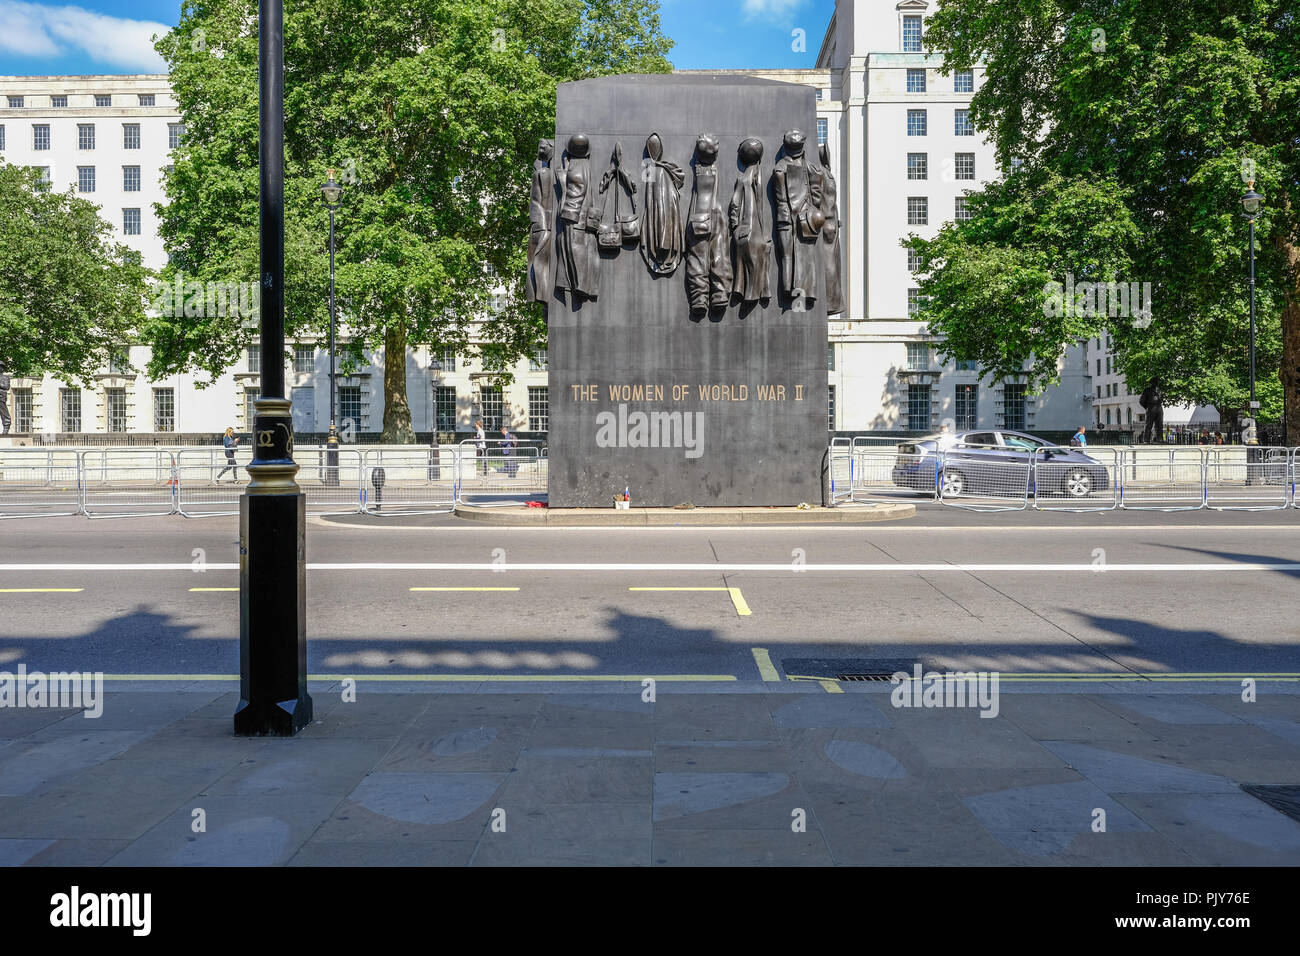 Whitehall, London, UK - June 8, 2018: The women of World War Two memorial in Whitehall on abright sunny day. Stock Photo